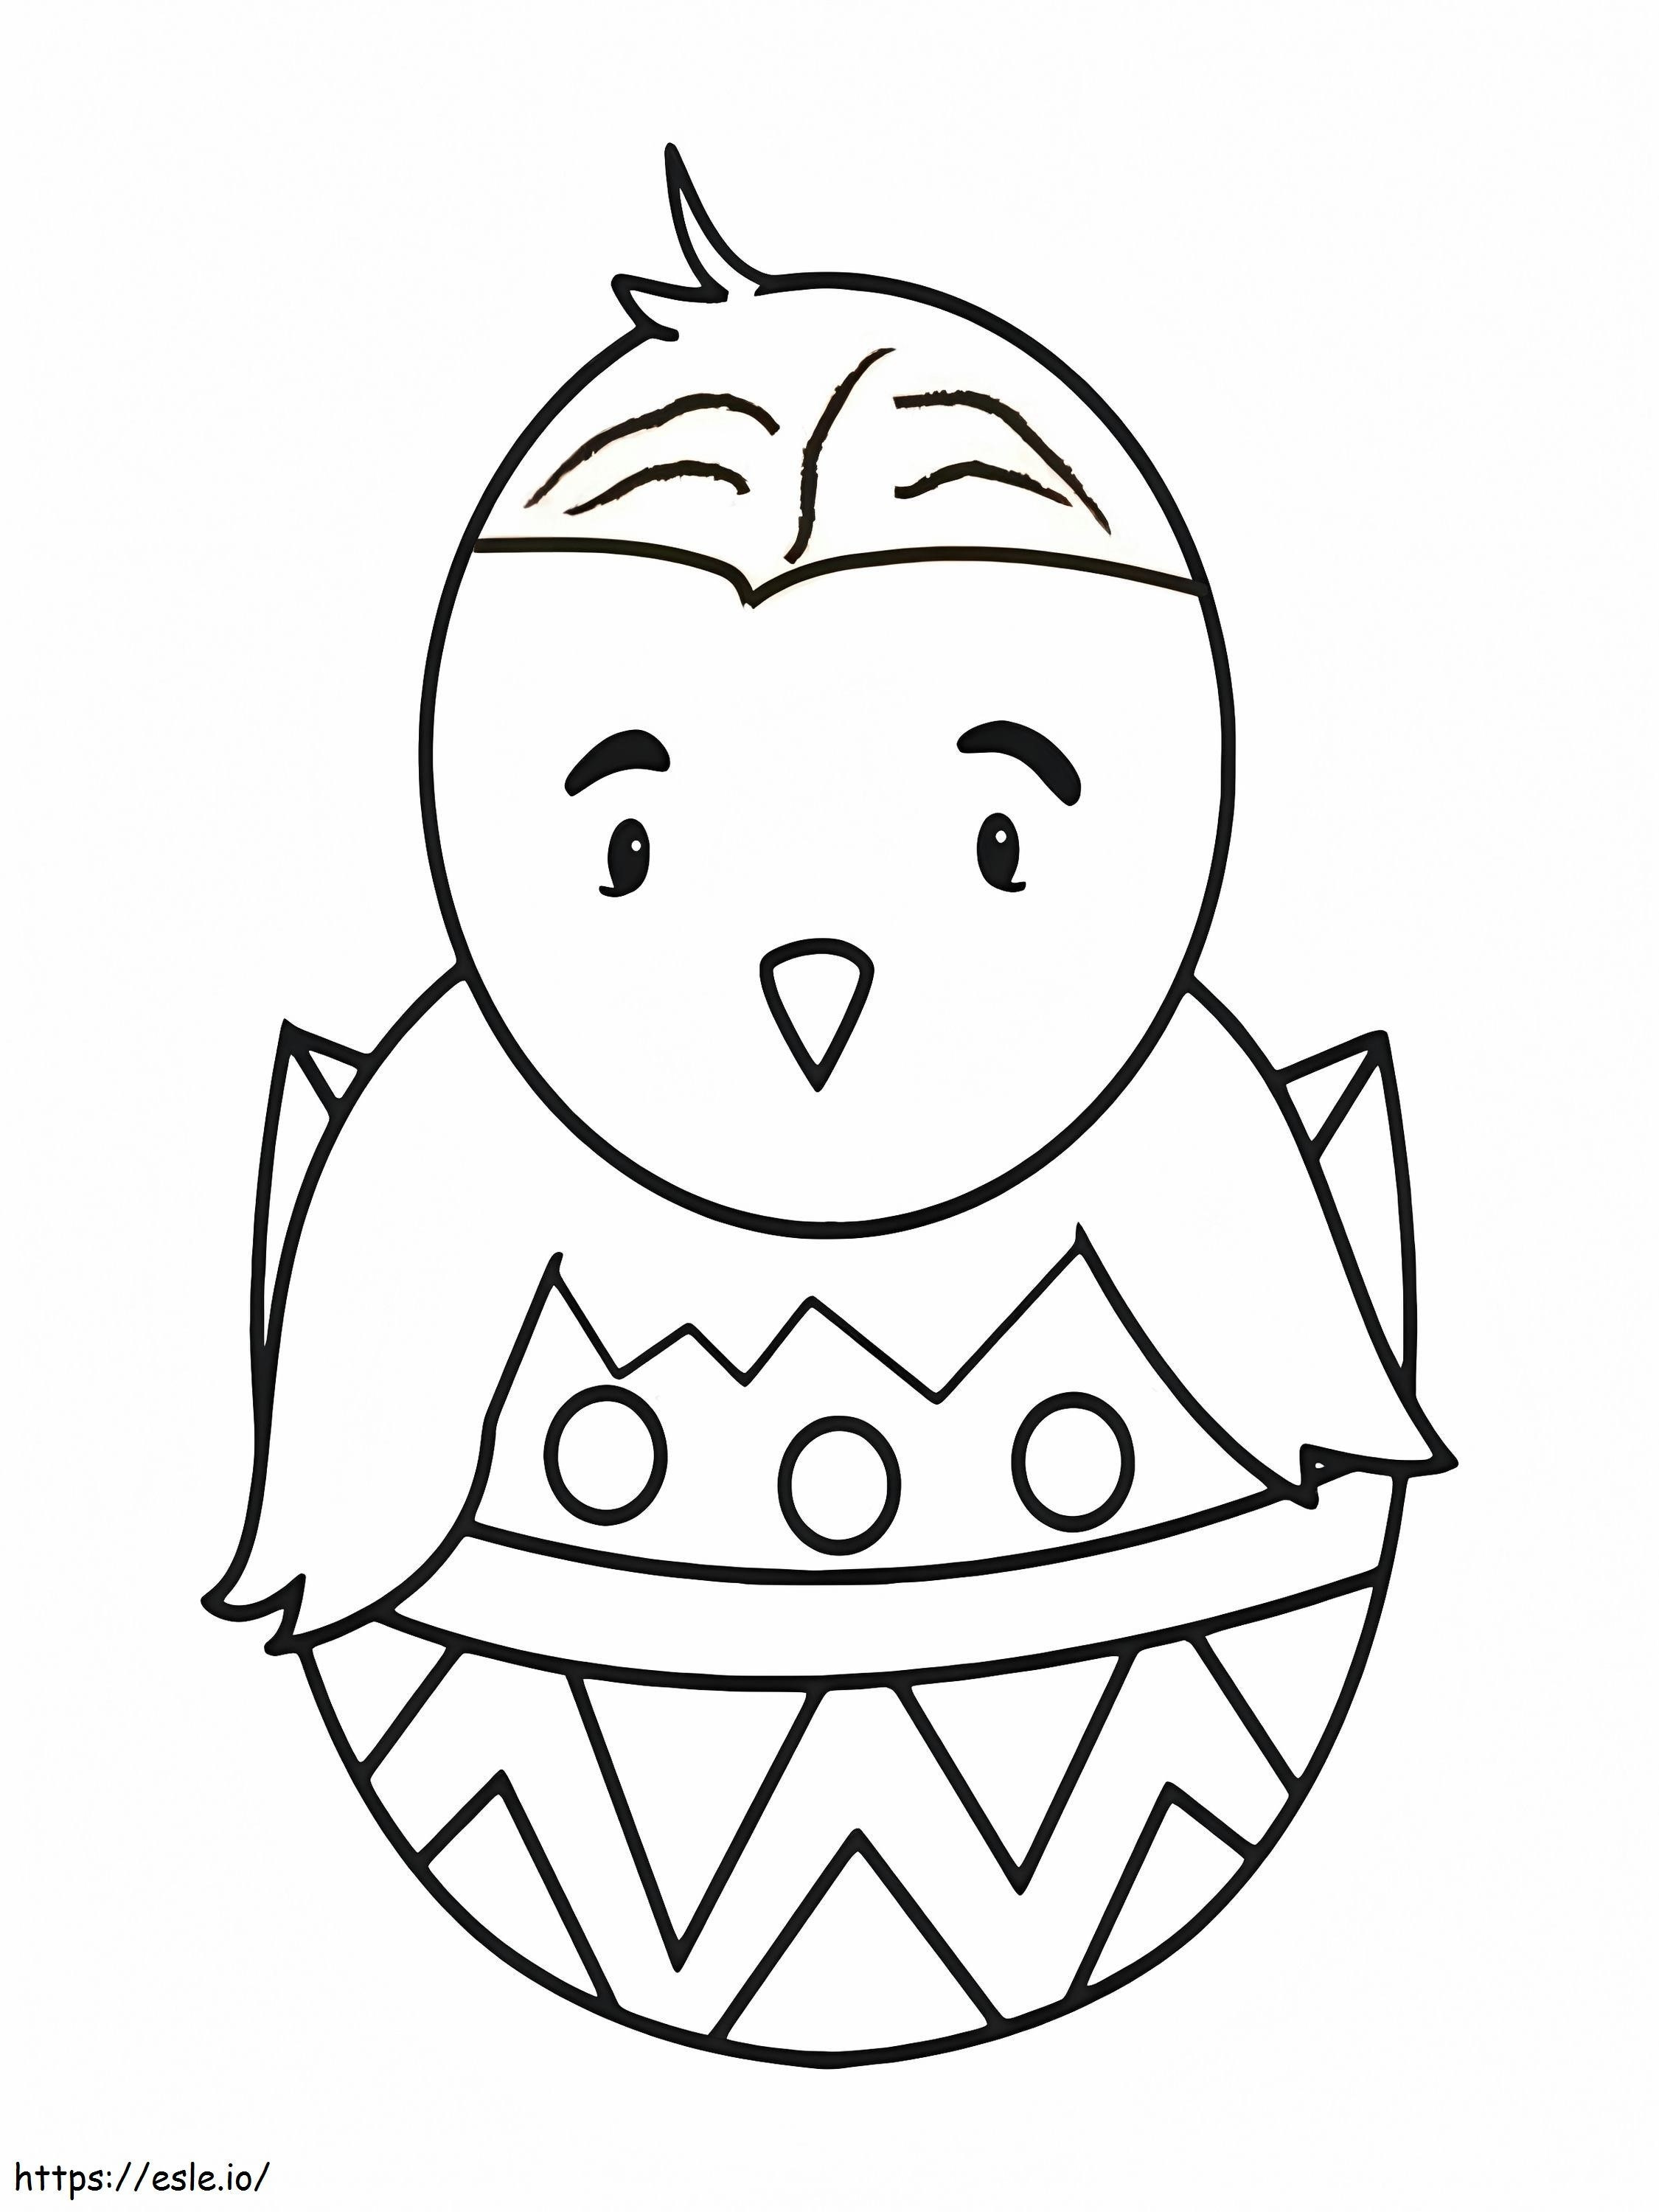 Easter Egg With Chick coloring page